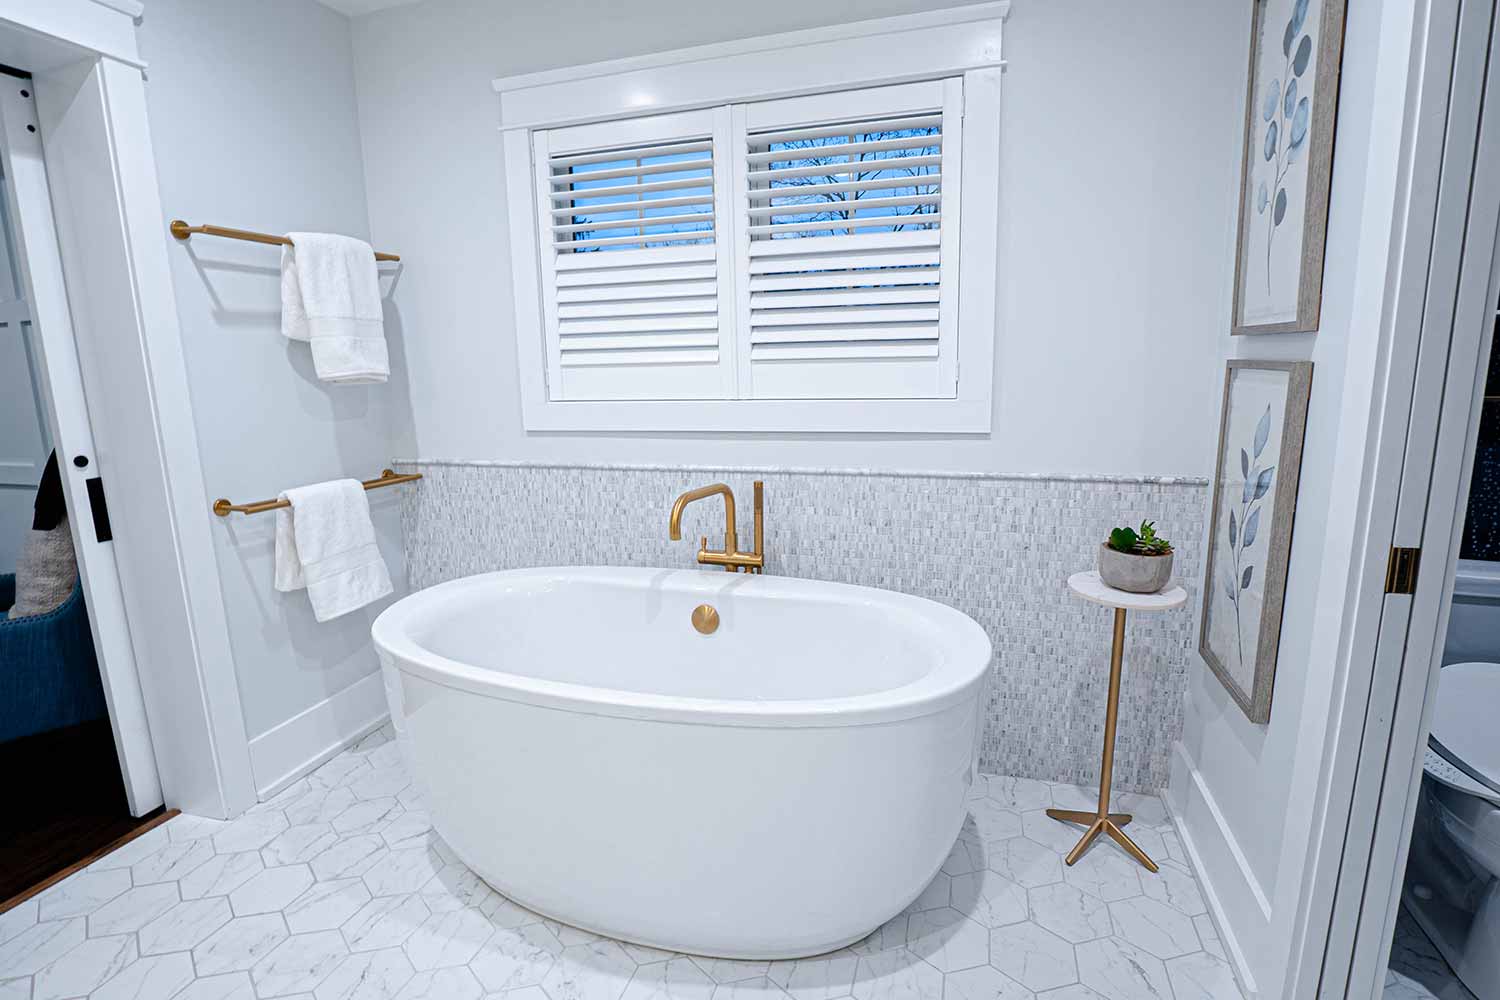 White and airy bathroom remodel with soaker tub.